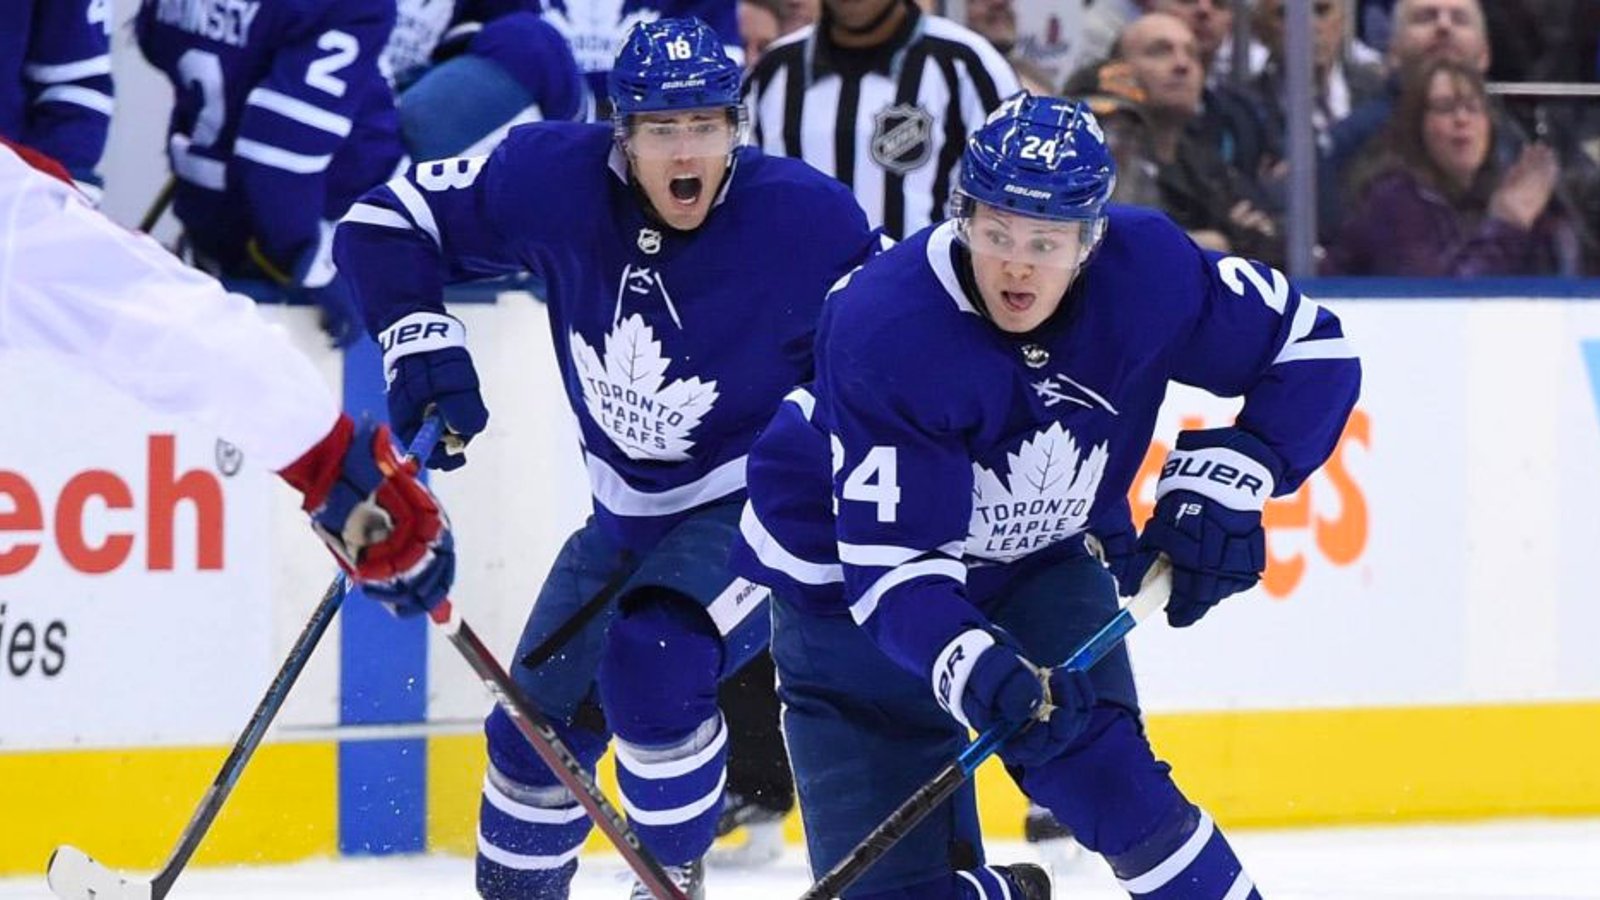 Leafs plan trade as they cannot face projected flat salary cap next season 